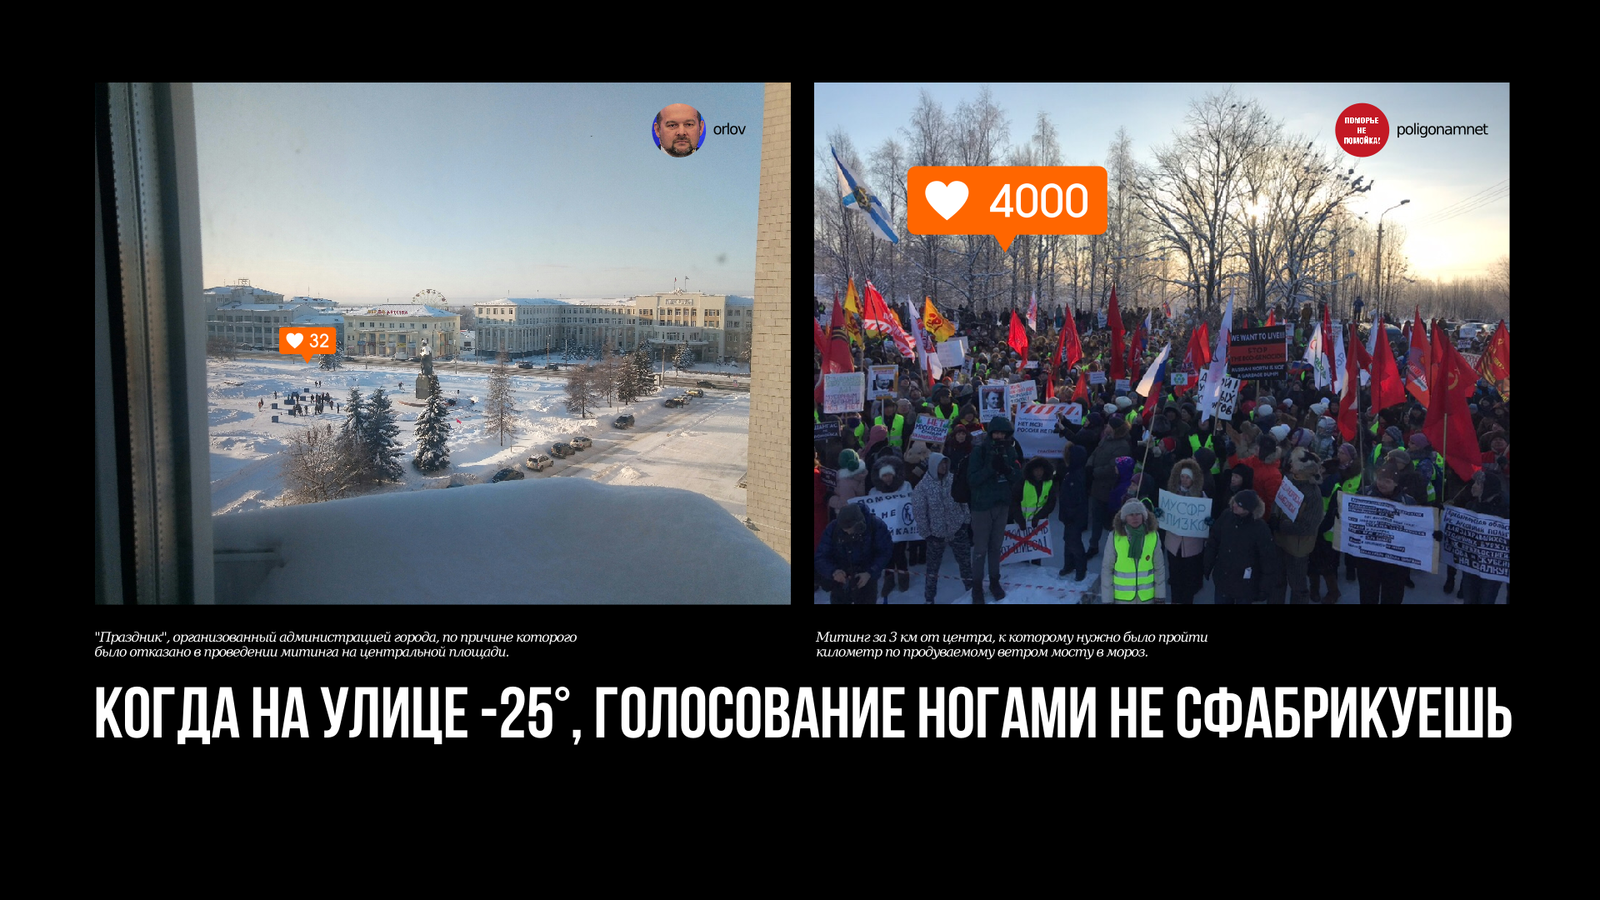 People - together, garbage - separately! - Garbage, Rally, Arkhangelsk region, Shies, North, Dump, The governor, People